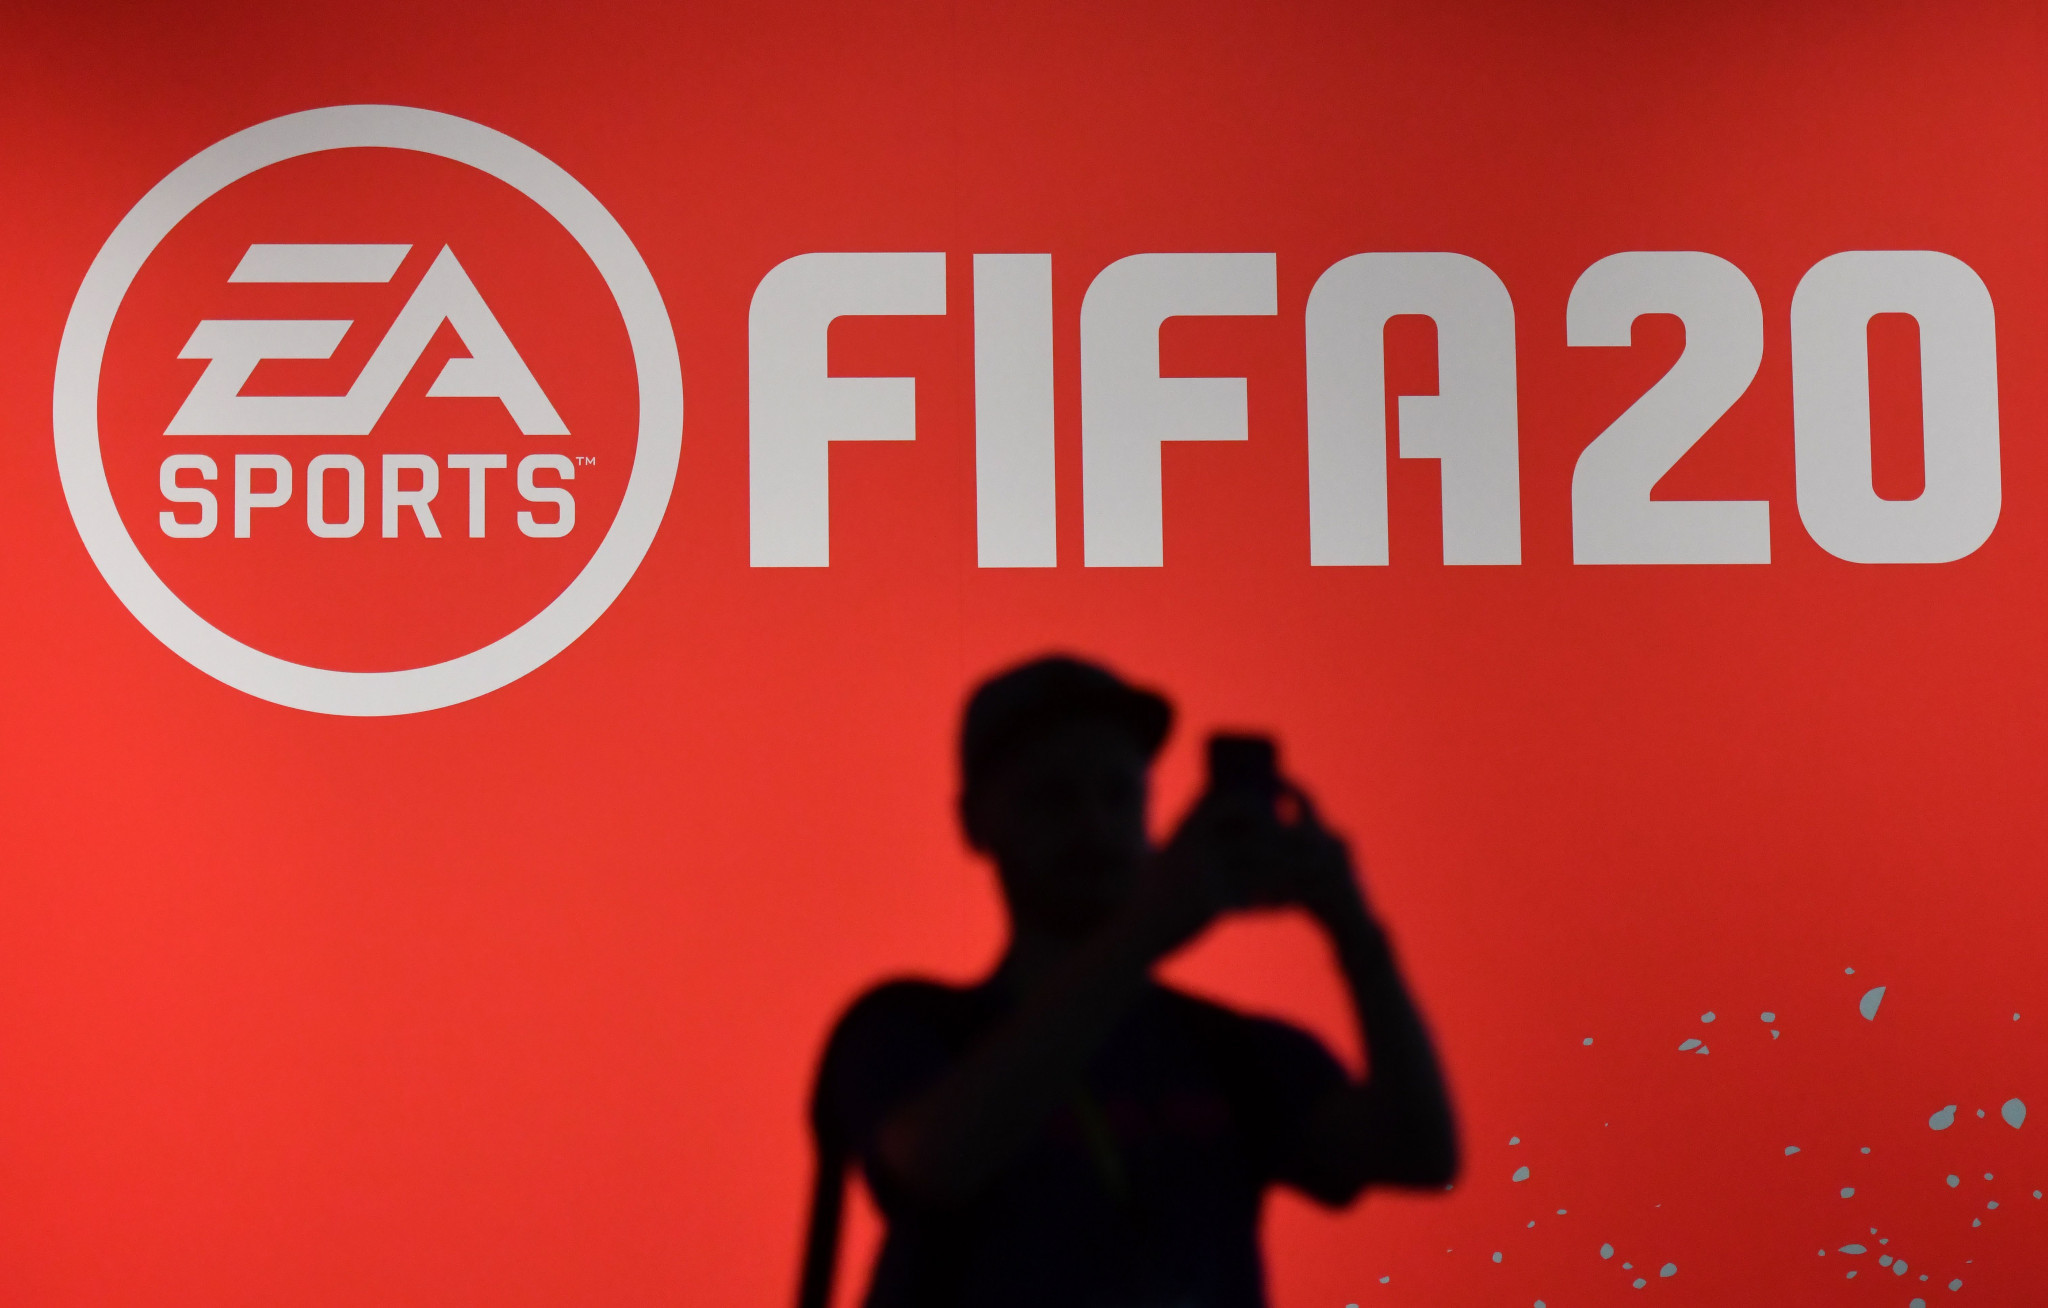 FIFA20 has been accused of having racial bias in its player ratings in a study ©FIFA 20